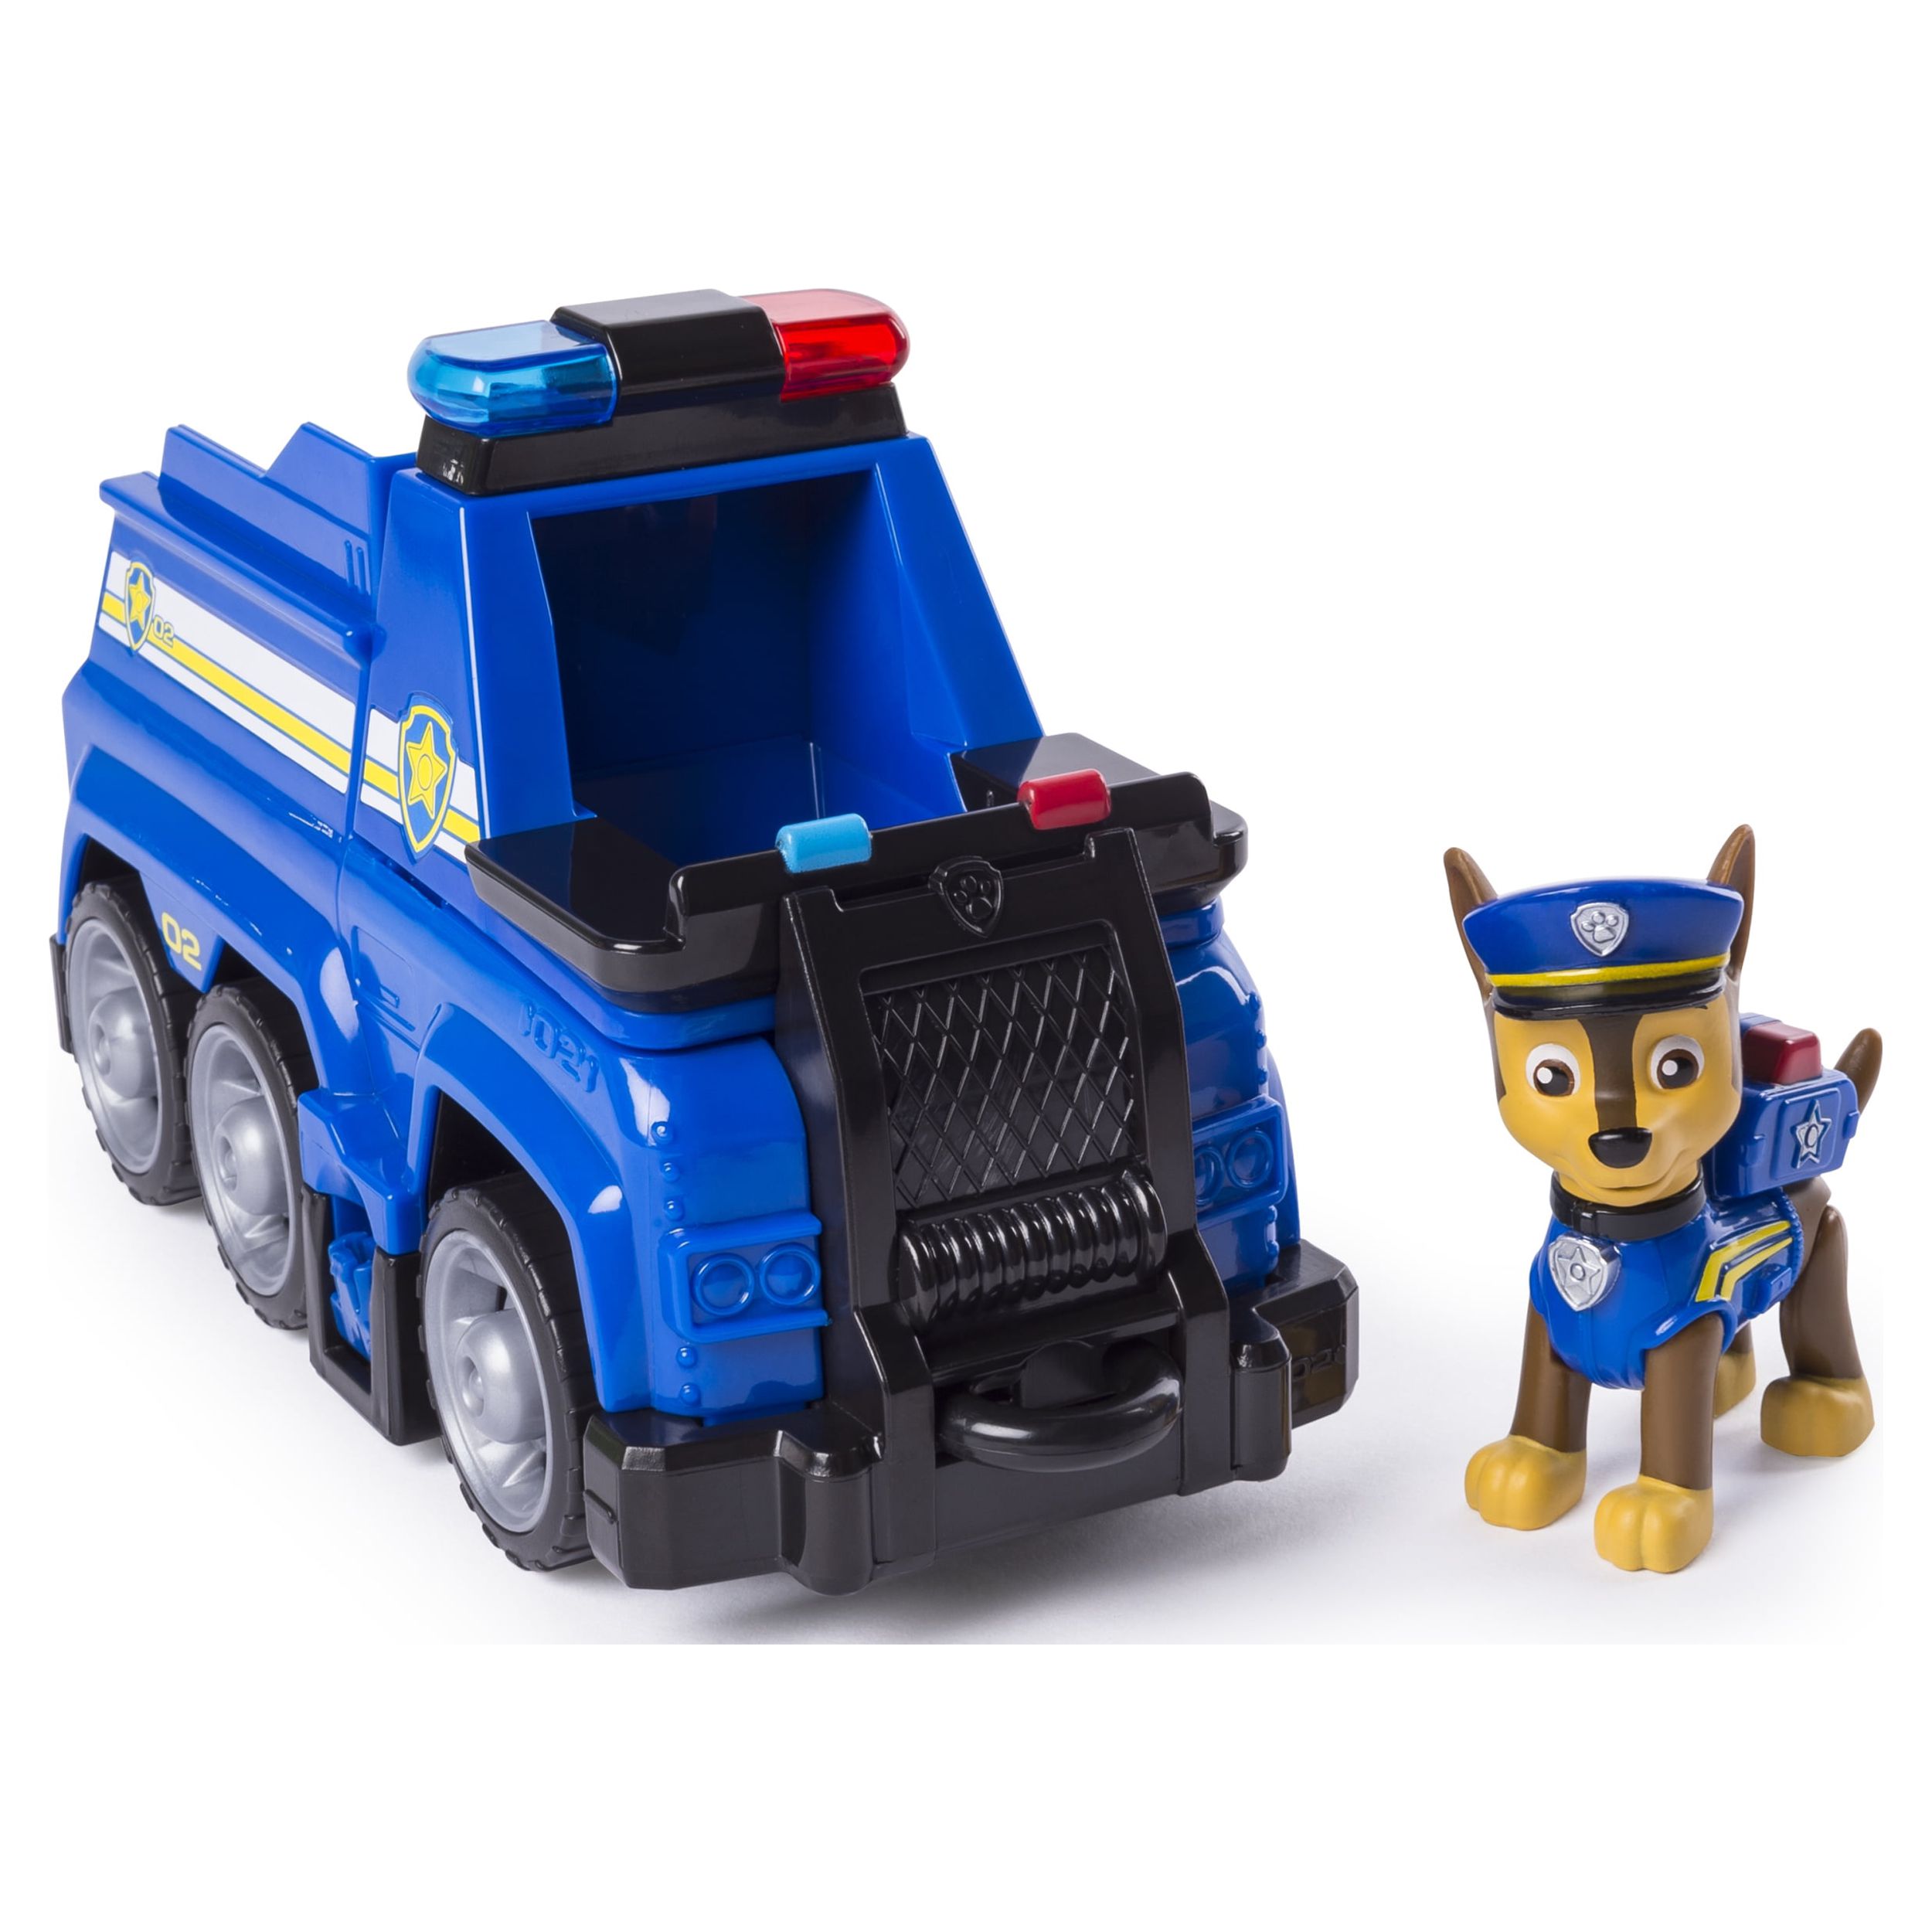 PAW Patrol Ultimate Rescue, Chase’s Ultimate Rescue Police Cruiser Vehicle, for Ages 3 and up - image 1 of 7